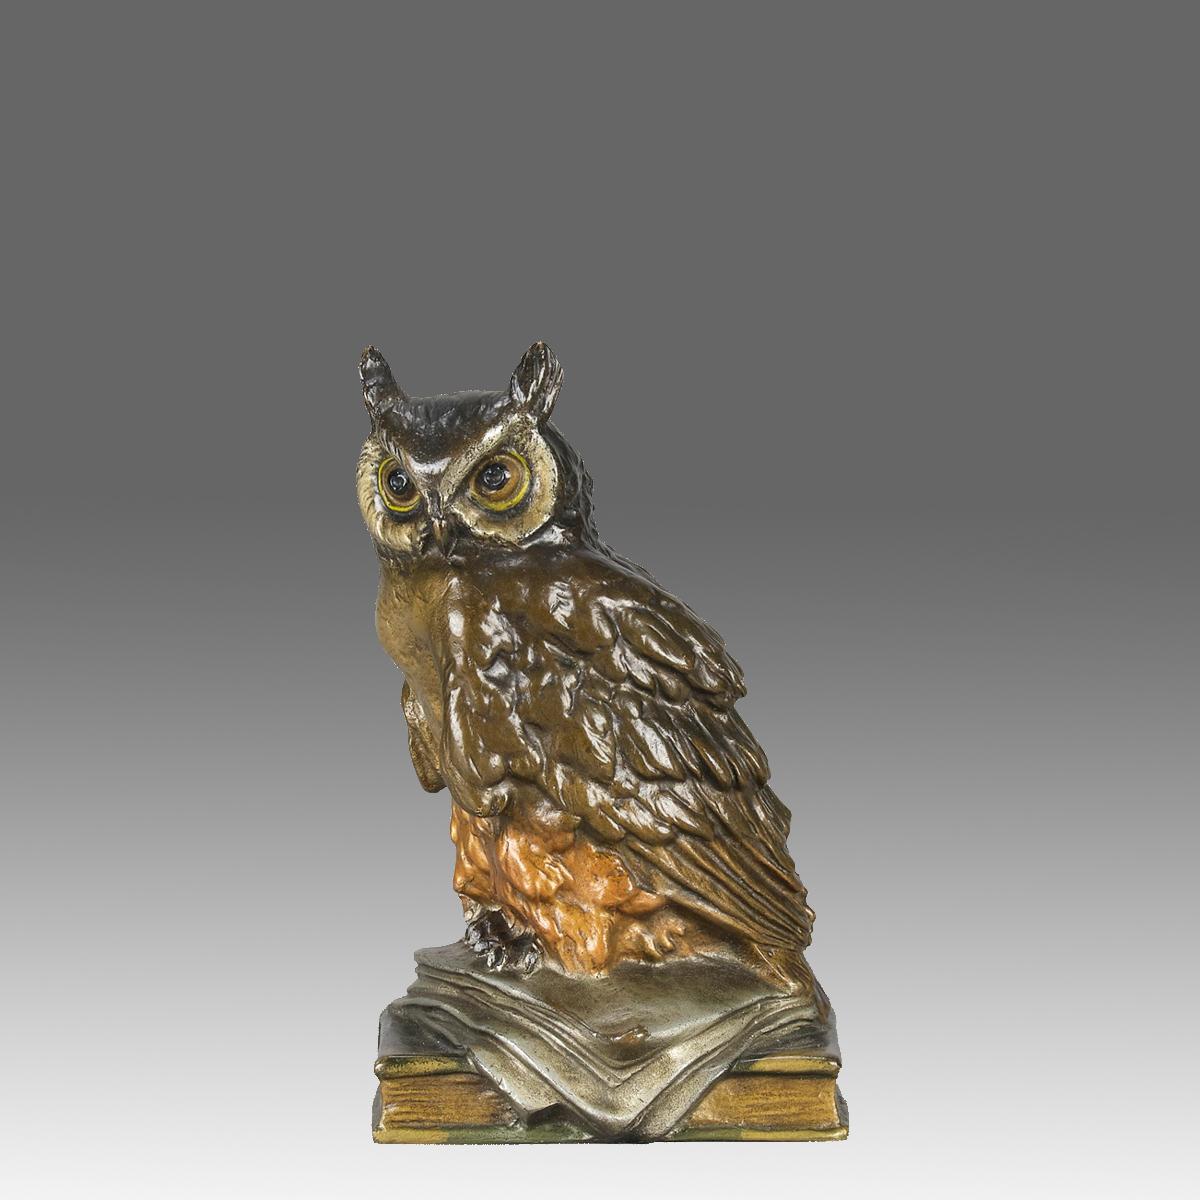 A very fine early 20th Century Vienna bronze study of an Owl perched upon books with excellent hand chased surface detail and fabulous cold painted colours, signed with the Bergman B in an Amphora vase

ADDITIONAL INFORMATION
Height:                